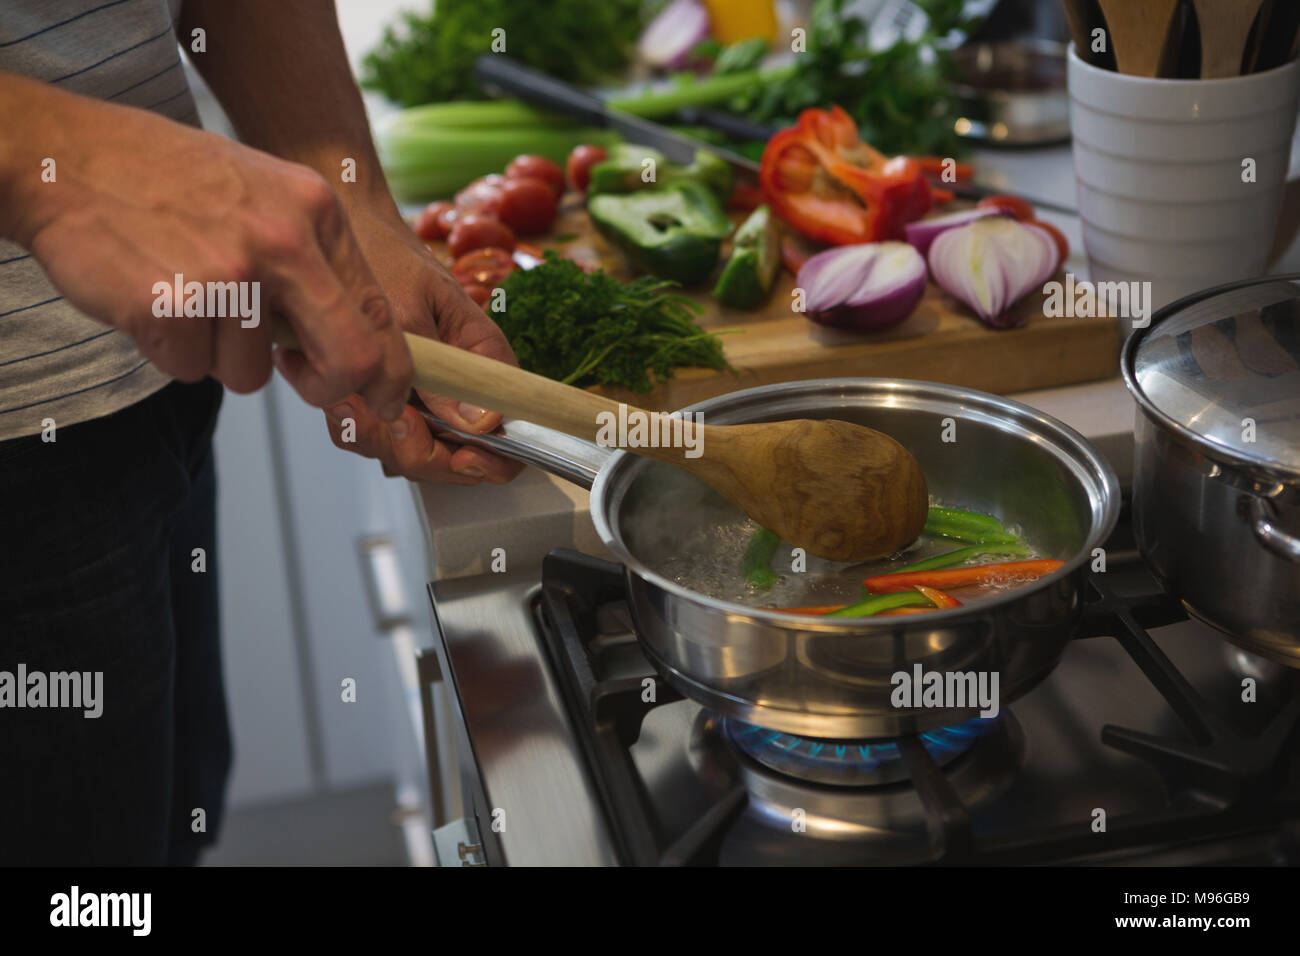 Man cooking food in kitchen Stock Photo